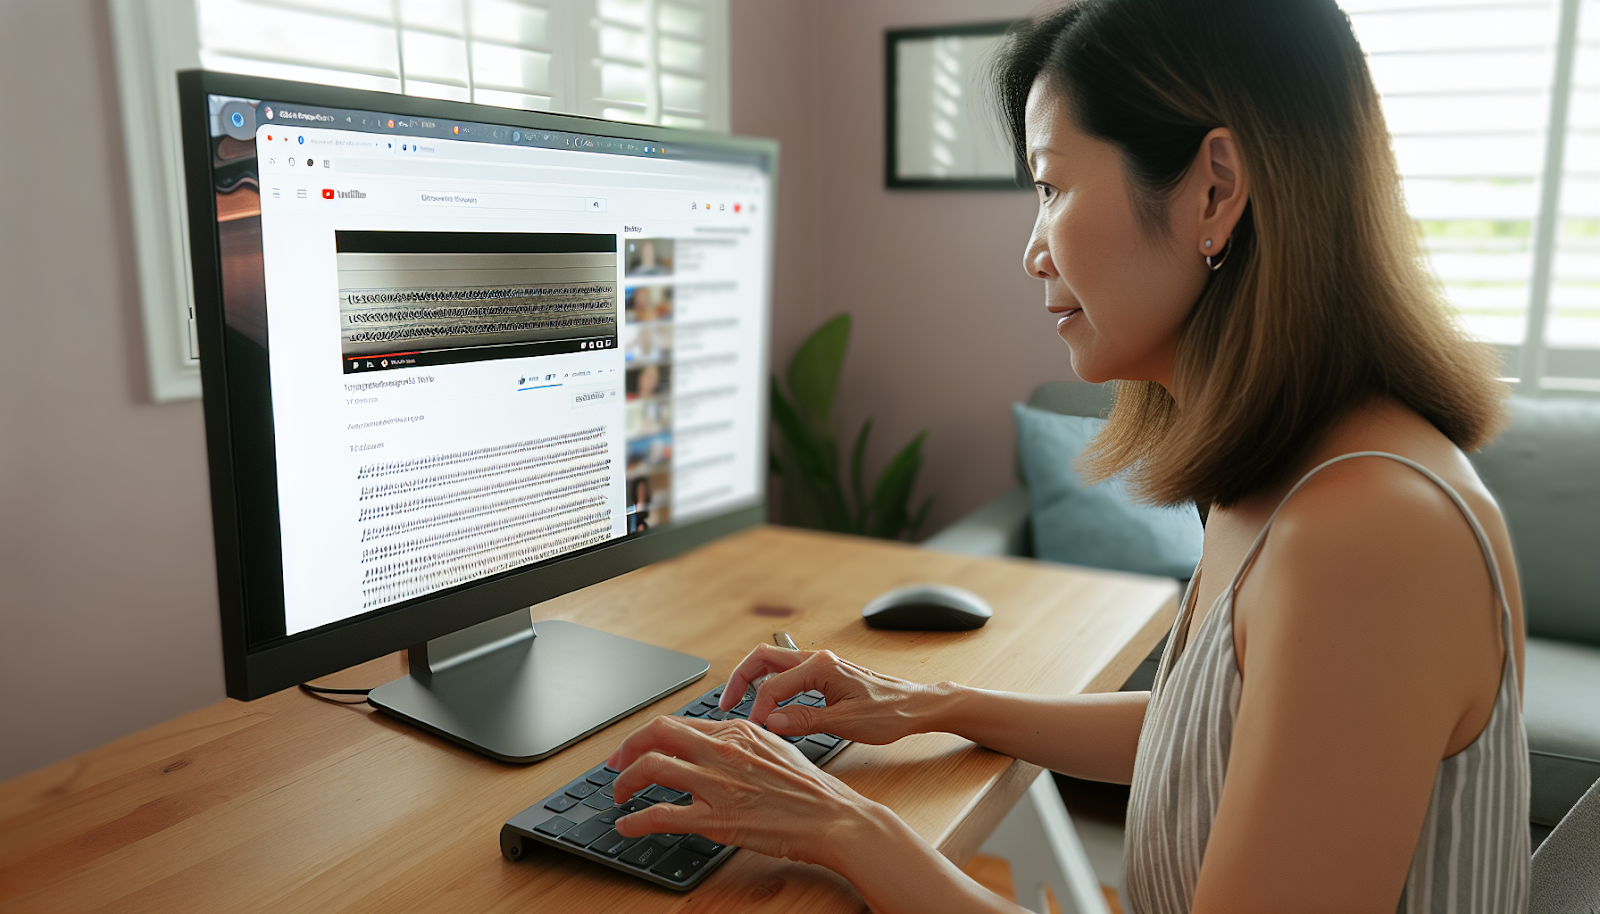 A person using a transcription tool on a computer